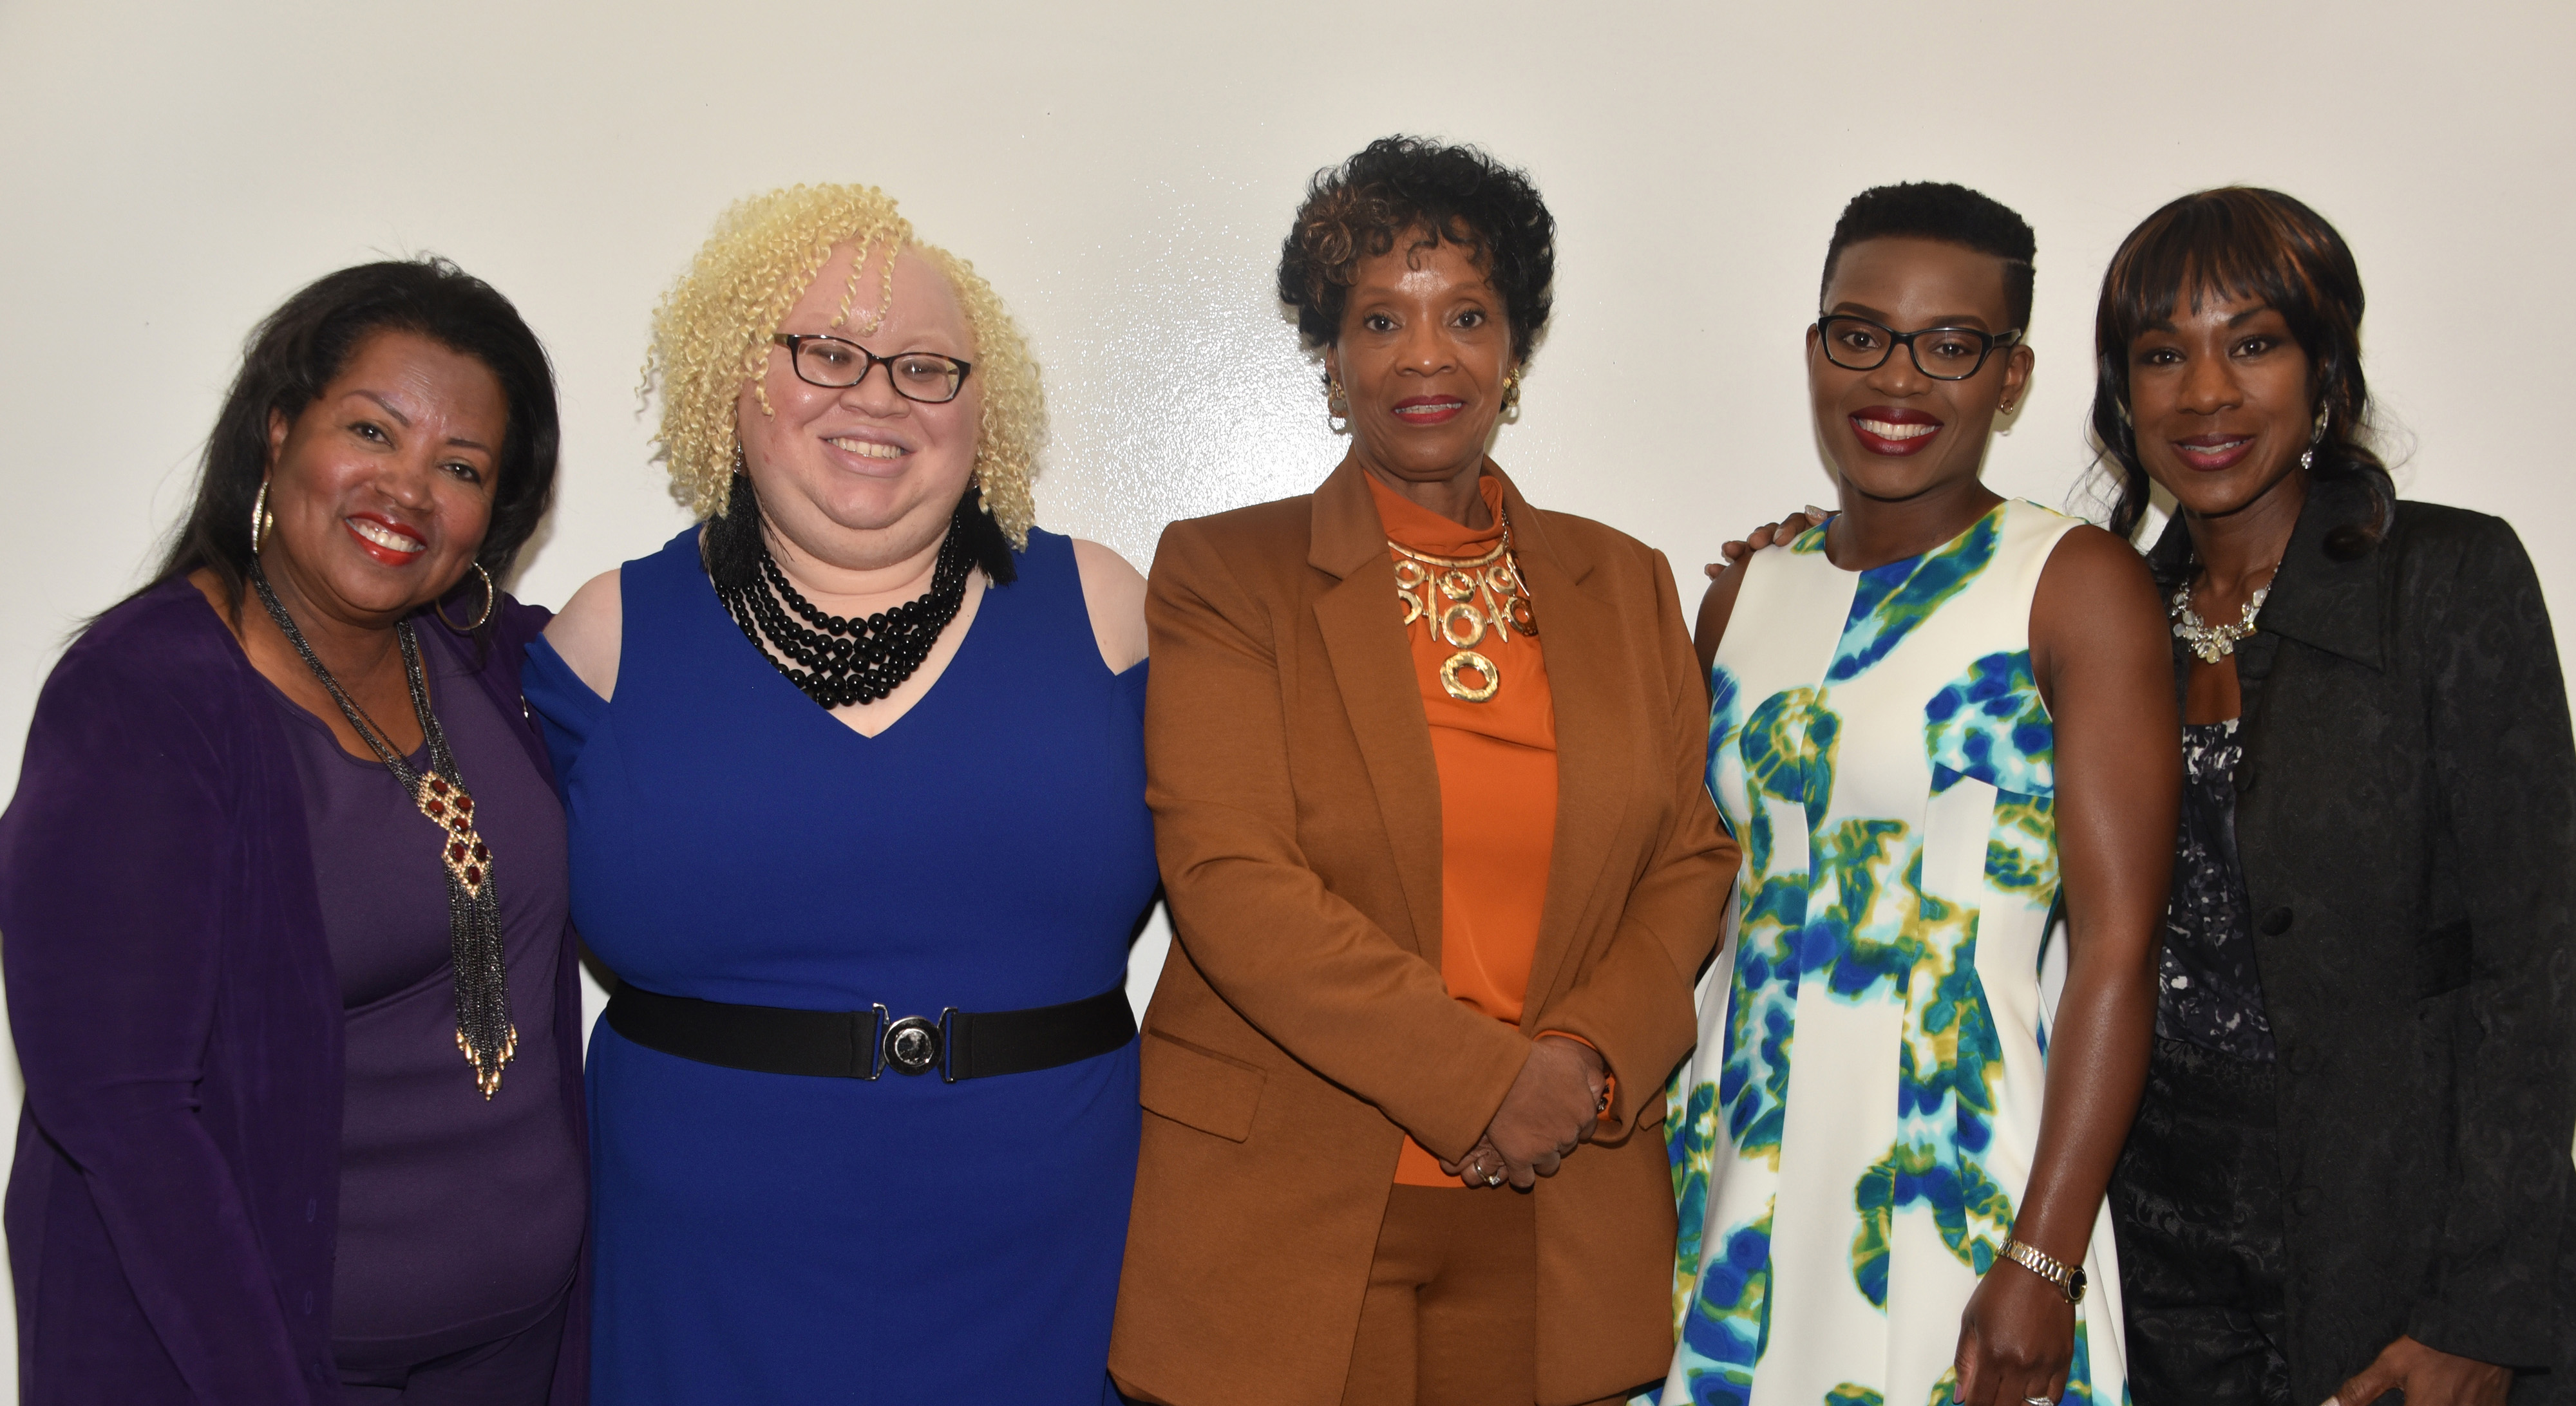 (L-r) Dr. Devona Williams, DSU Board of Trustees chairperson, Sara Crawford-Jones, director of the Women's Business Center, of True Access Capital, Audrey Scott-Hynson, owner of A. Scott Enterprises, Linda Arrey keynote speaker, and Lillie Crawford, event organizer, gather for a photo during the Women's Entrepreneurship Week observance at the University.